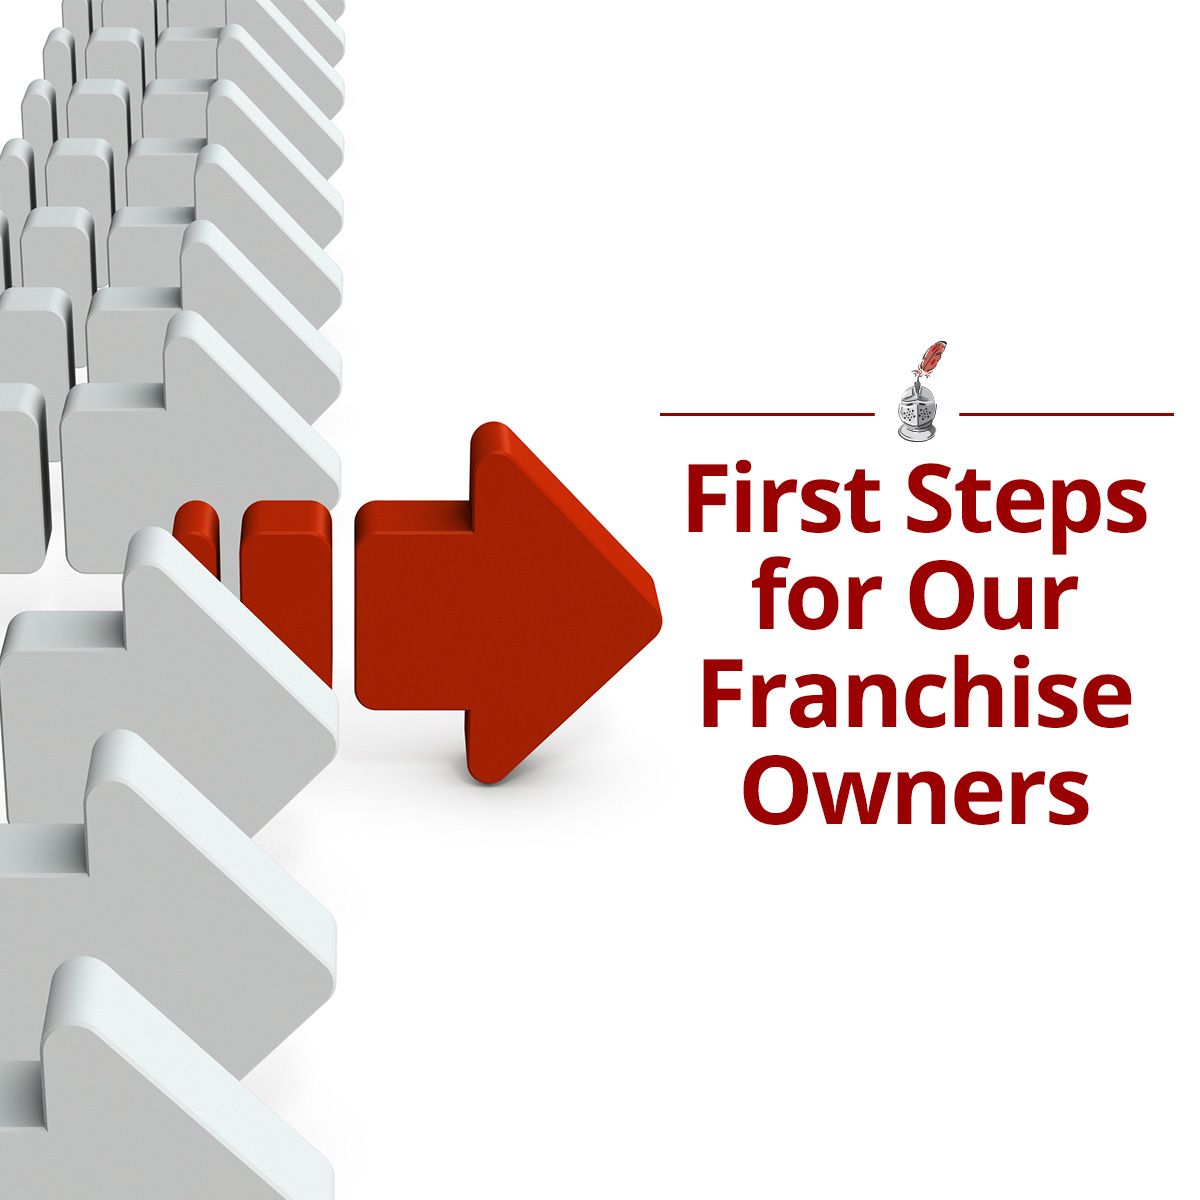 First Steps for Our Franchise Owners